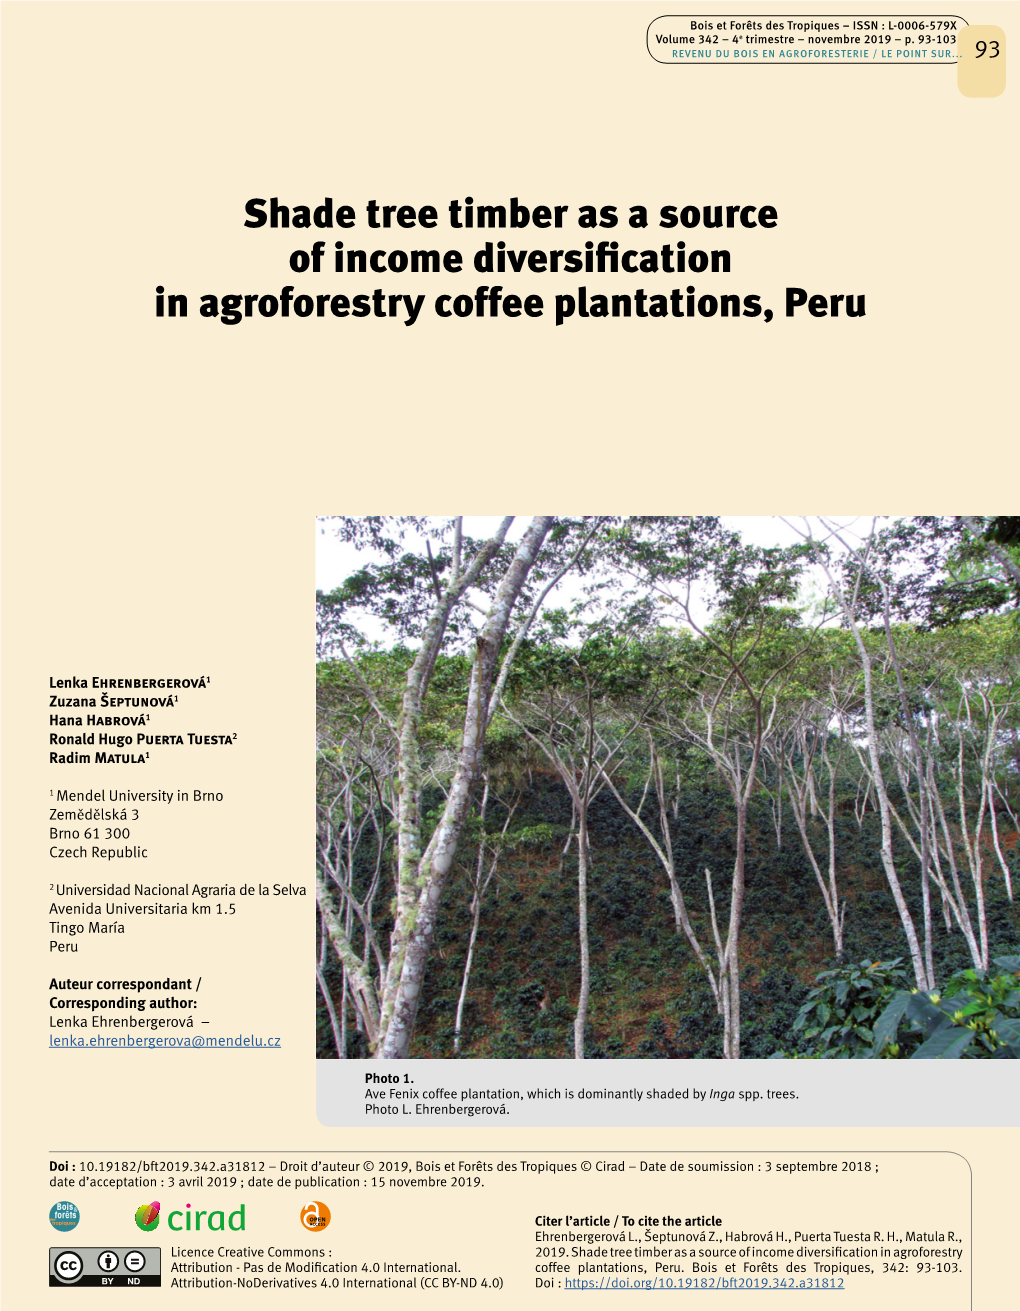 Shade Tree Timber As a Source of Income Diversification in Agroforestry Coffee Plantations, Peru